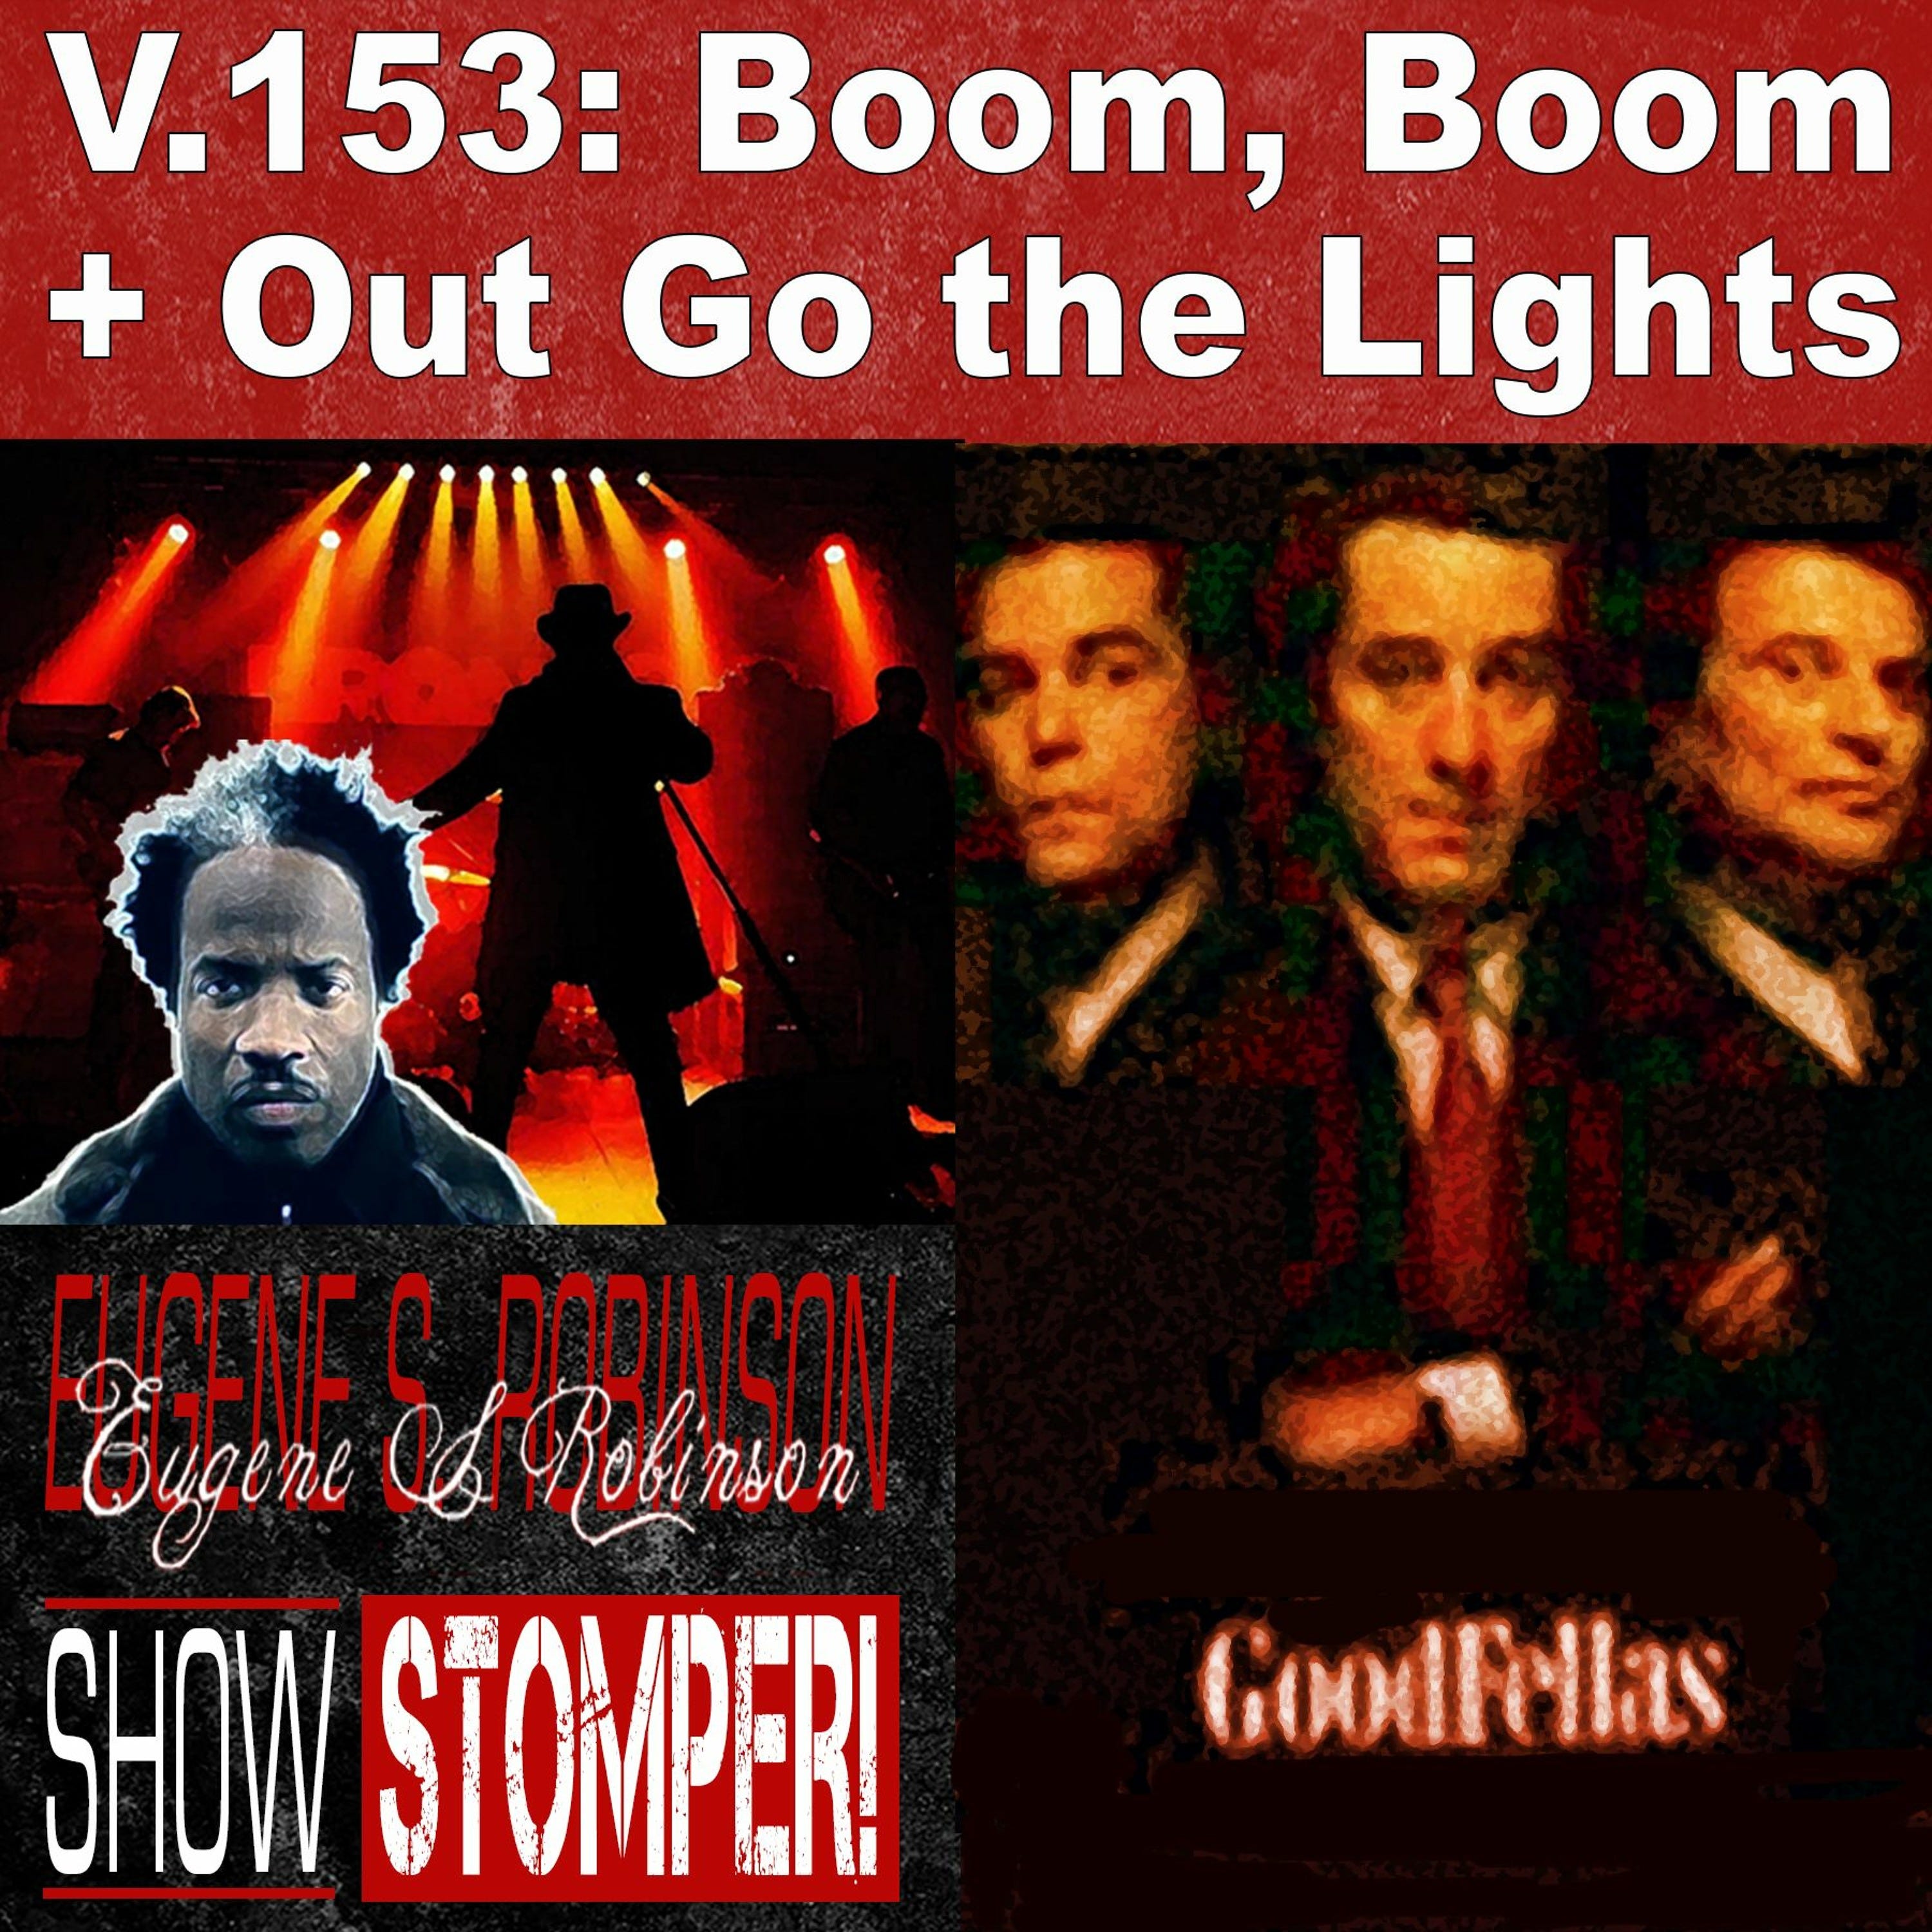 V.153 Boom, Boom + Out Go the Lights on The Eugene S. Robinson Show Stomper!